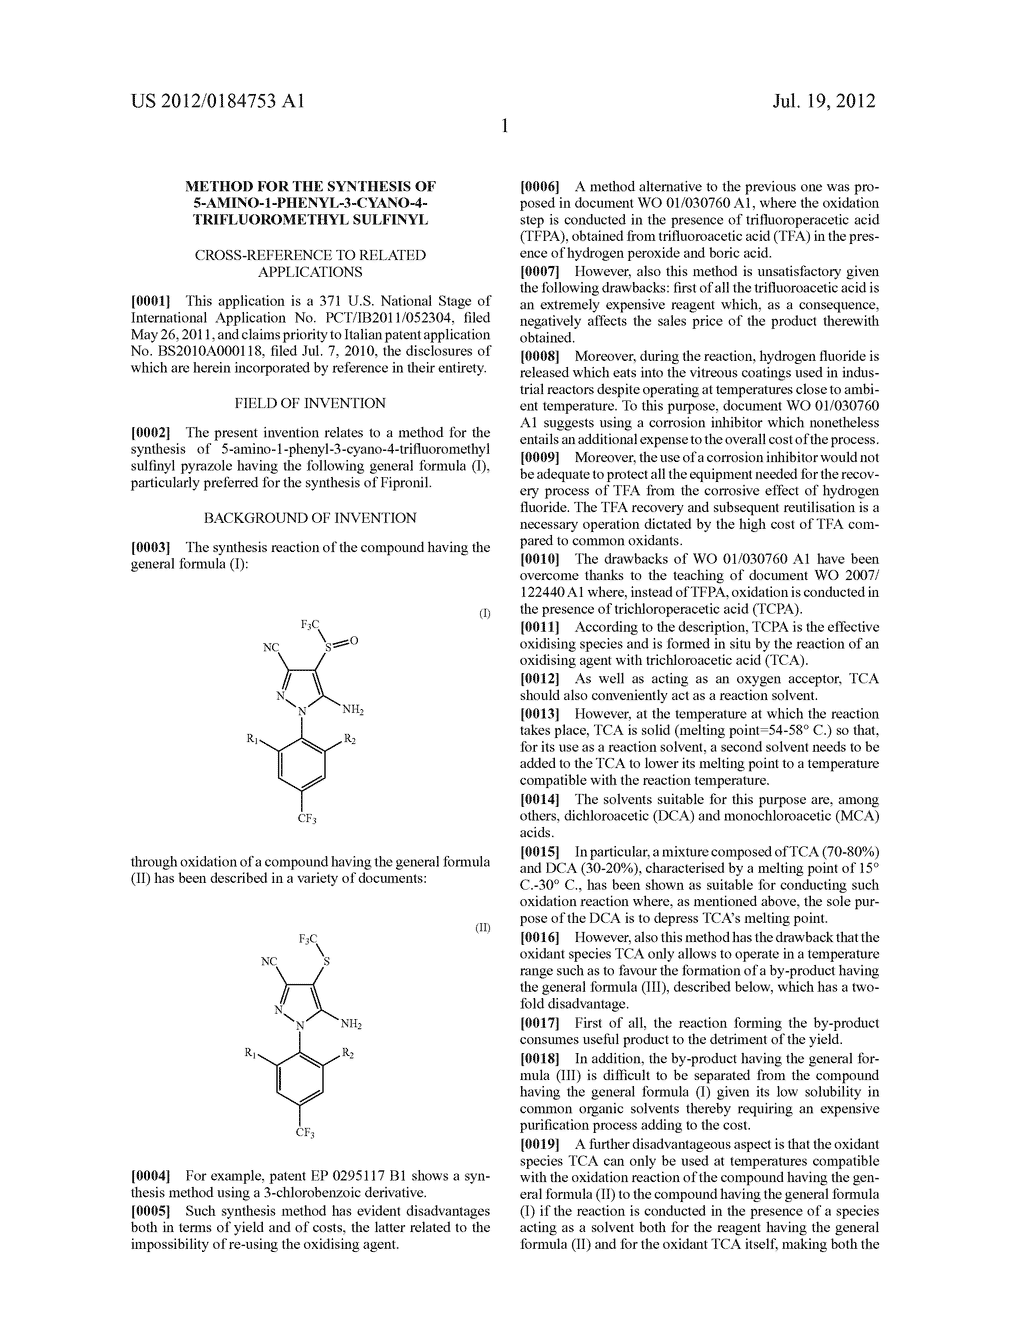 METHOD FOR THE SYNTHESIS OF 5-AMINO-1-PHENYL-3-CYANO-4-TRIFLUOROMETHYL     SULFINYL - diagram, schematic, and image 02